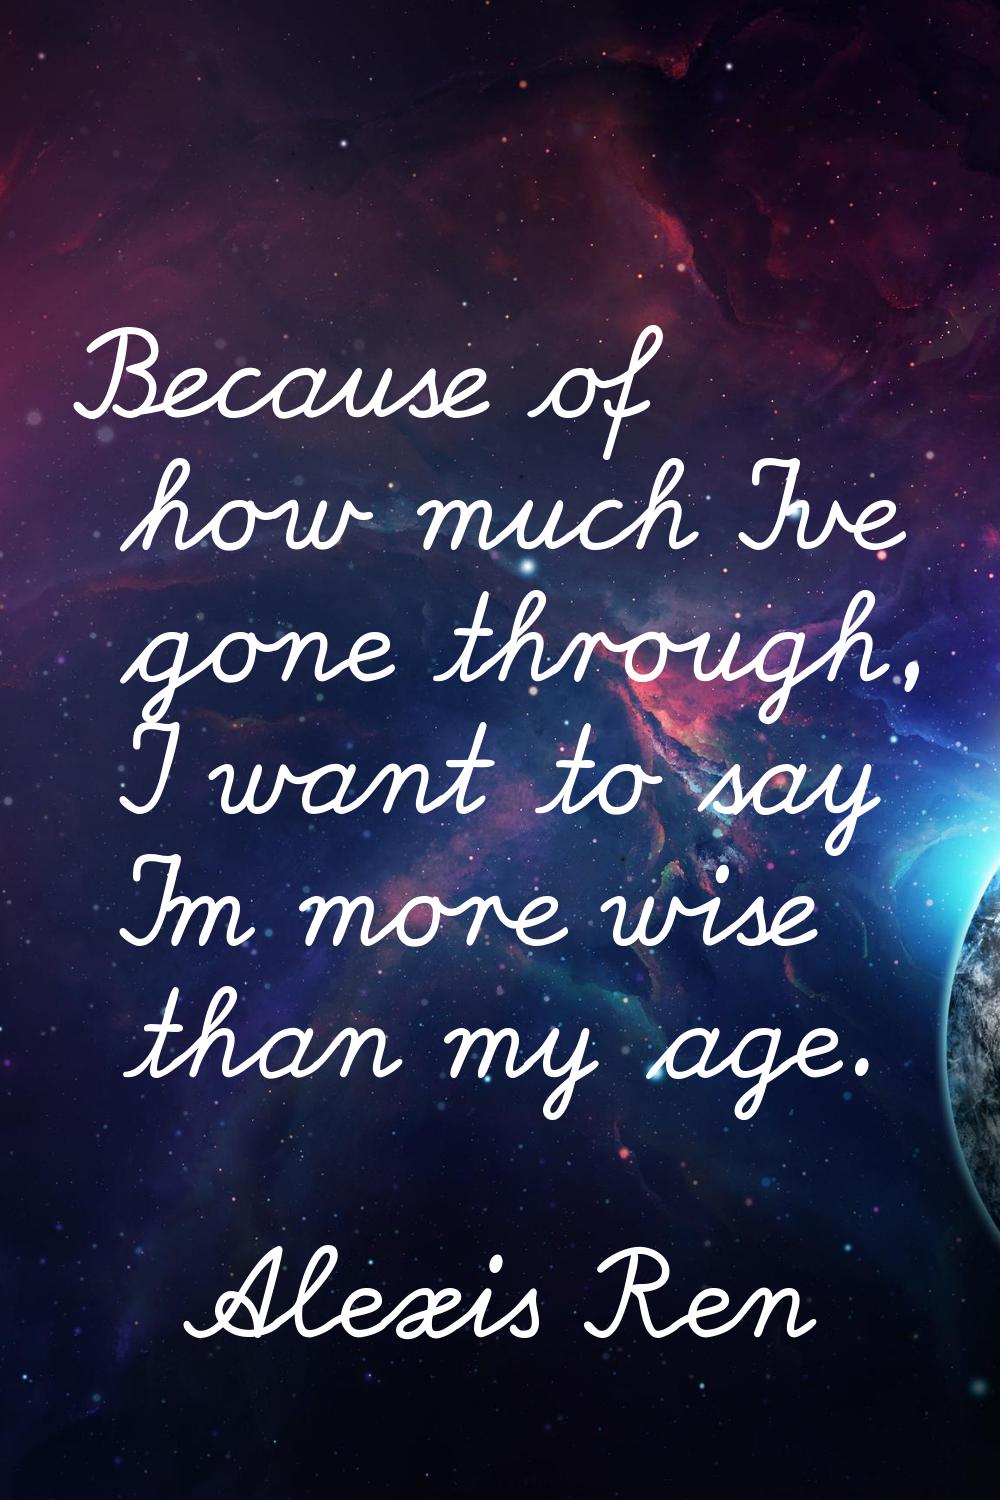 Because of how much I've gone through, I want to say I'm more wise than my age.